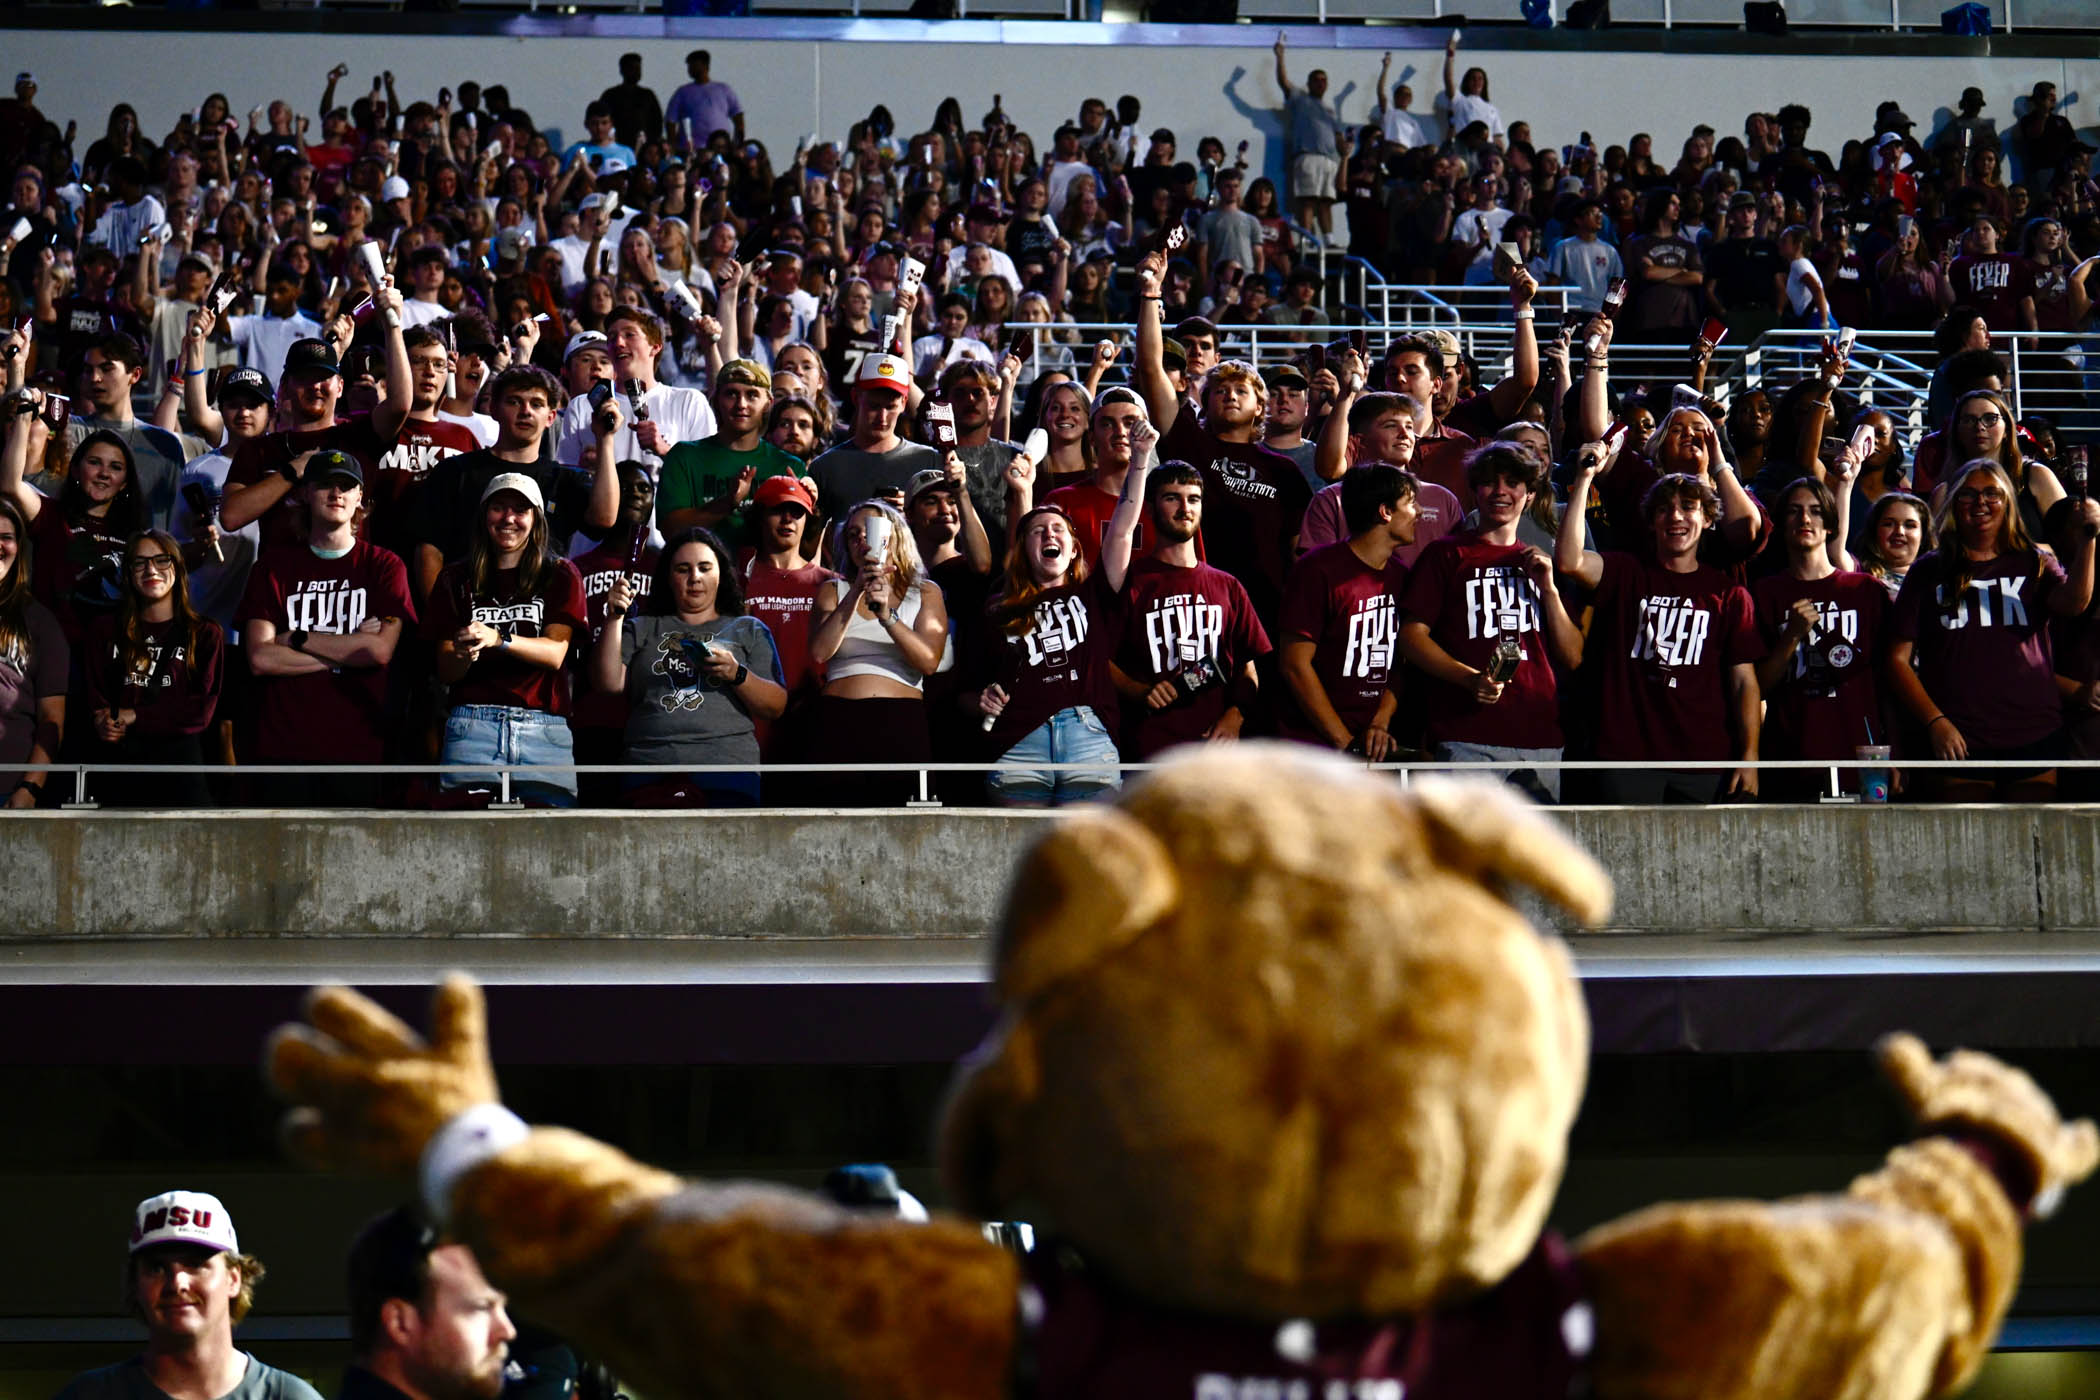 Bully engages with a crowd of MSU students at Cowbell Yell, a night pep rally to kick off the first football game of the season.